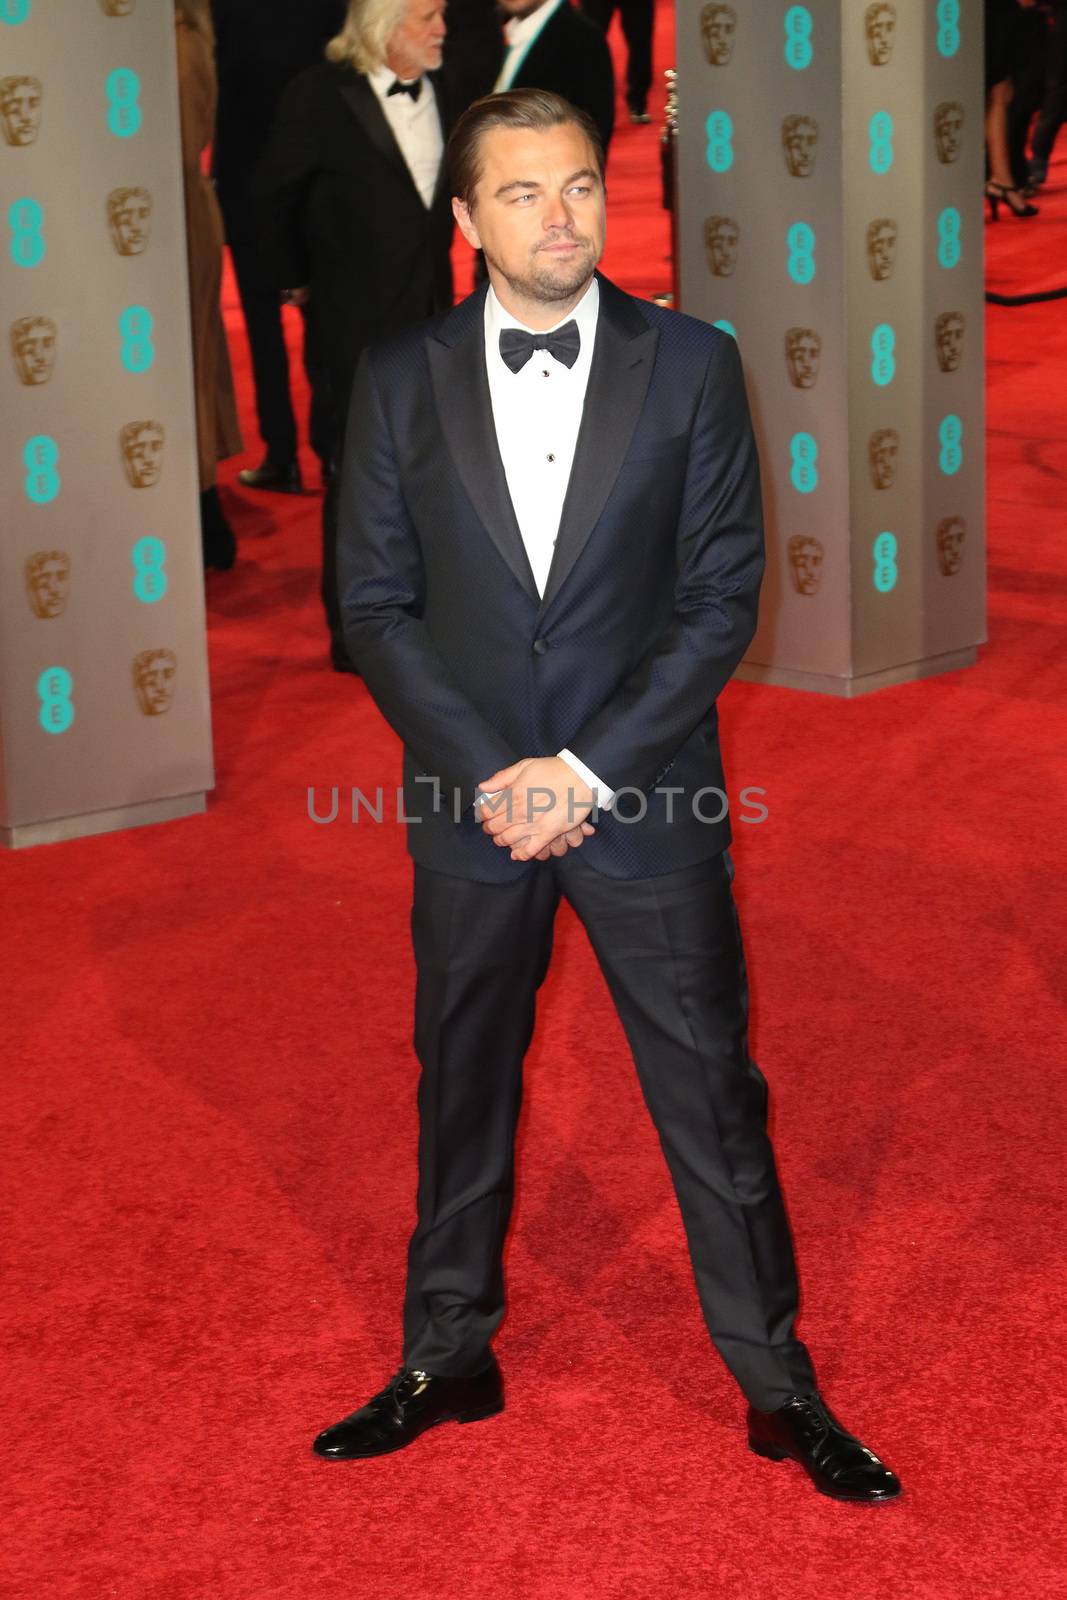 UK, London: American actor Leonardo DiCaprio poses on the red Carpet at the EE British Academy Film Awards, BAFTA Awards, at the Royal Opera House in London, England, on 14 February 2016.